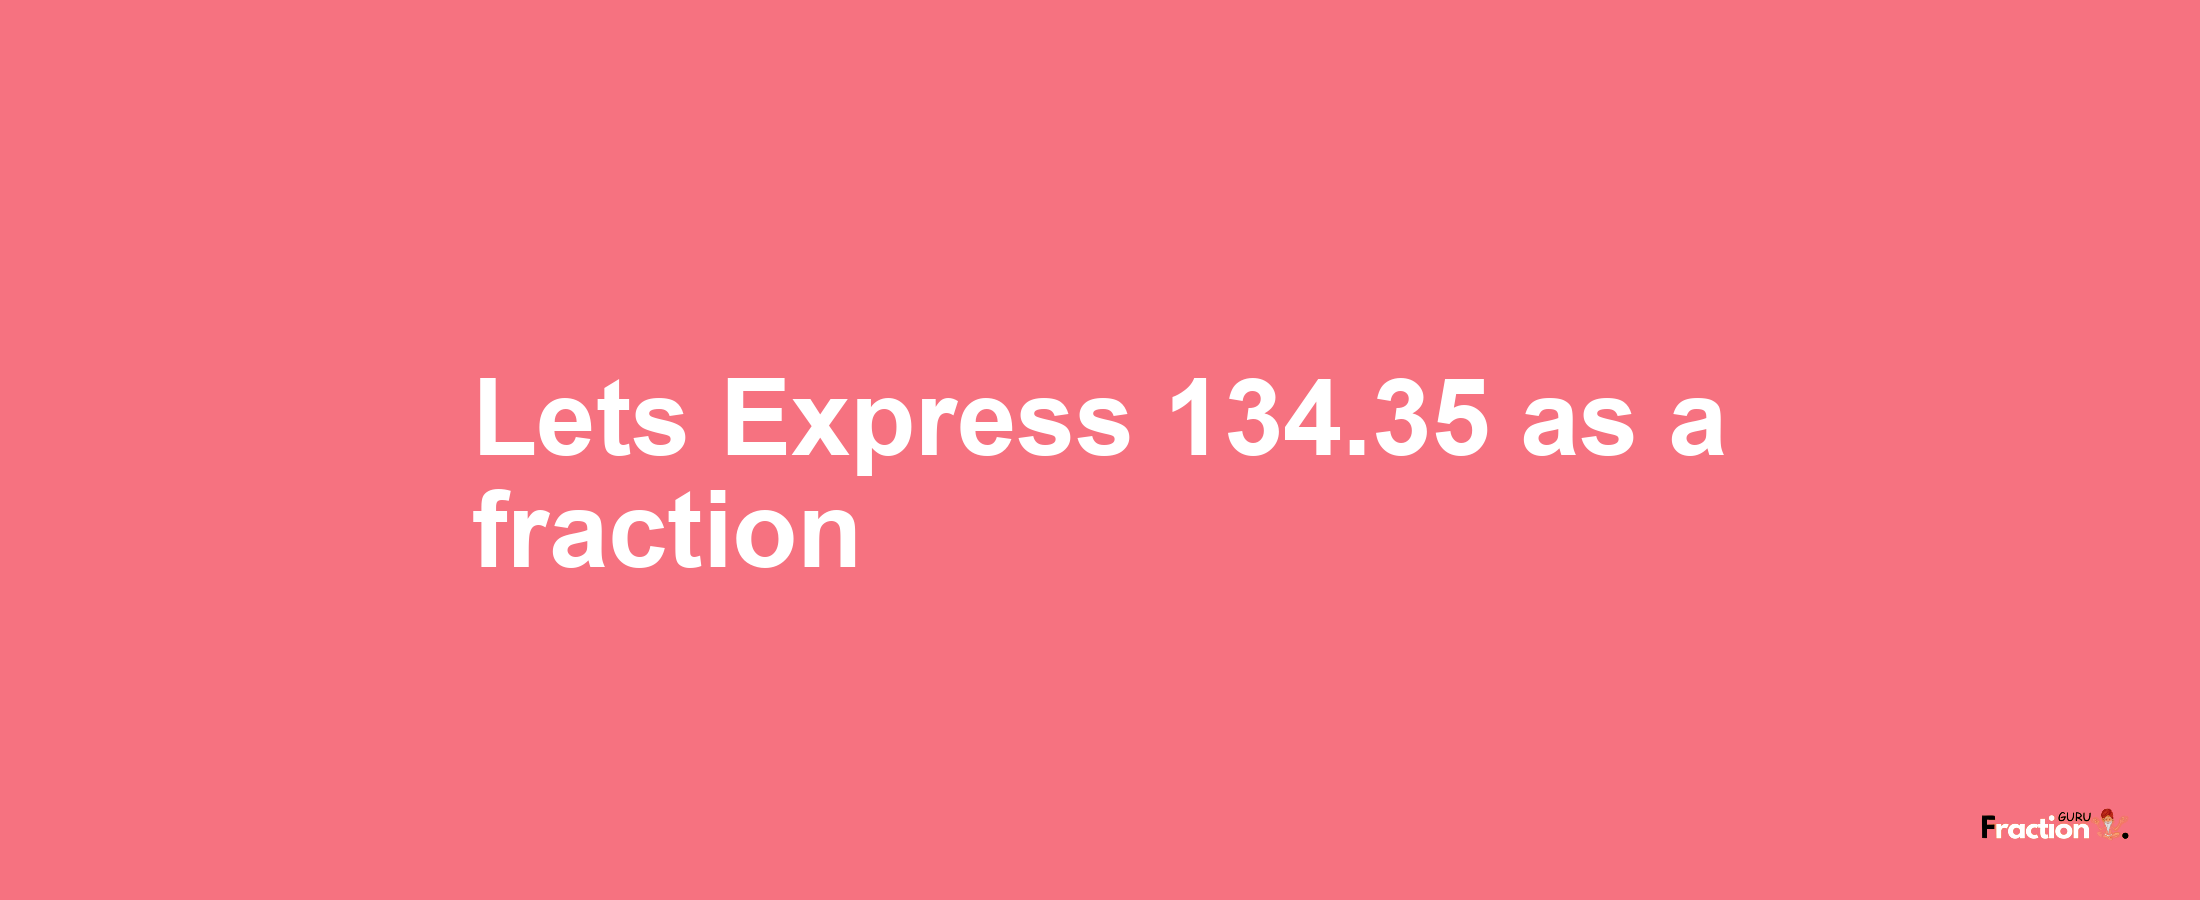 Lets Express 134.35 as afraction